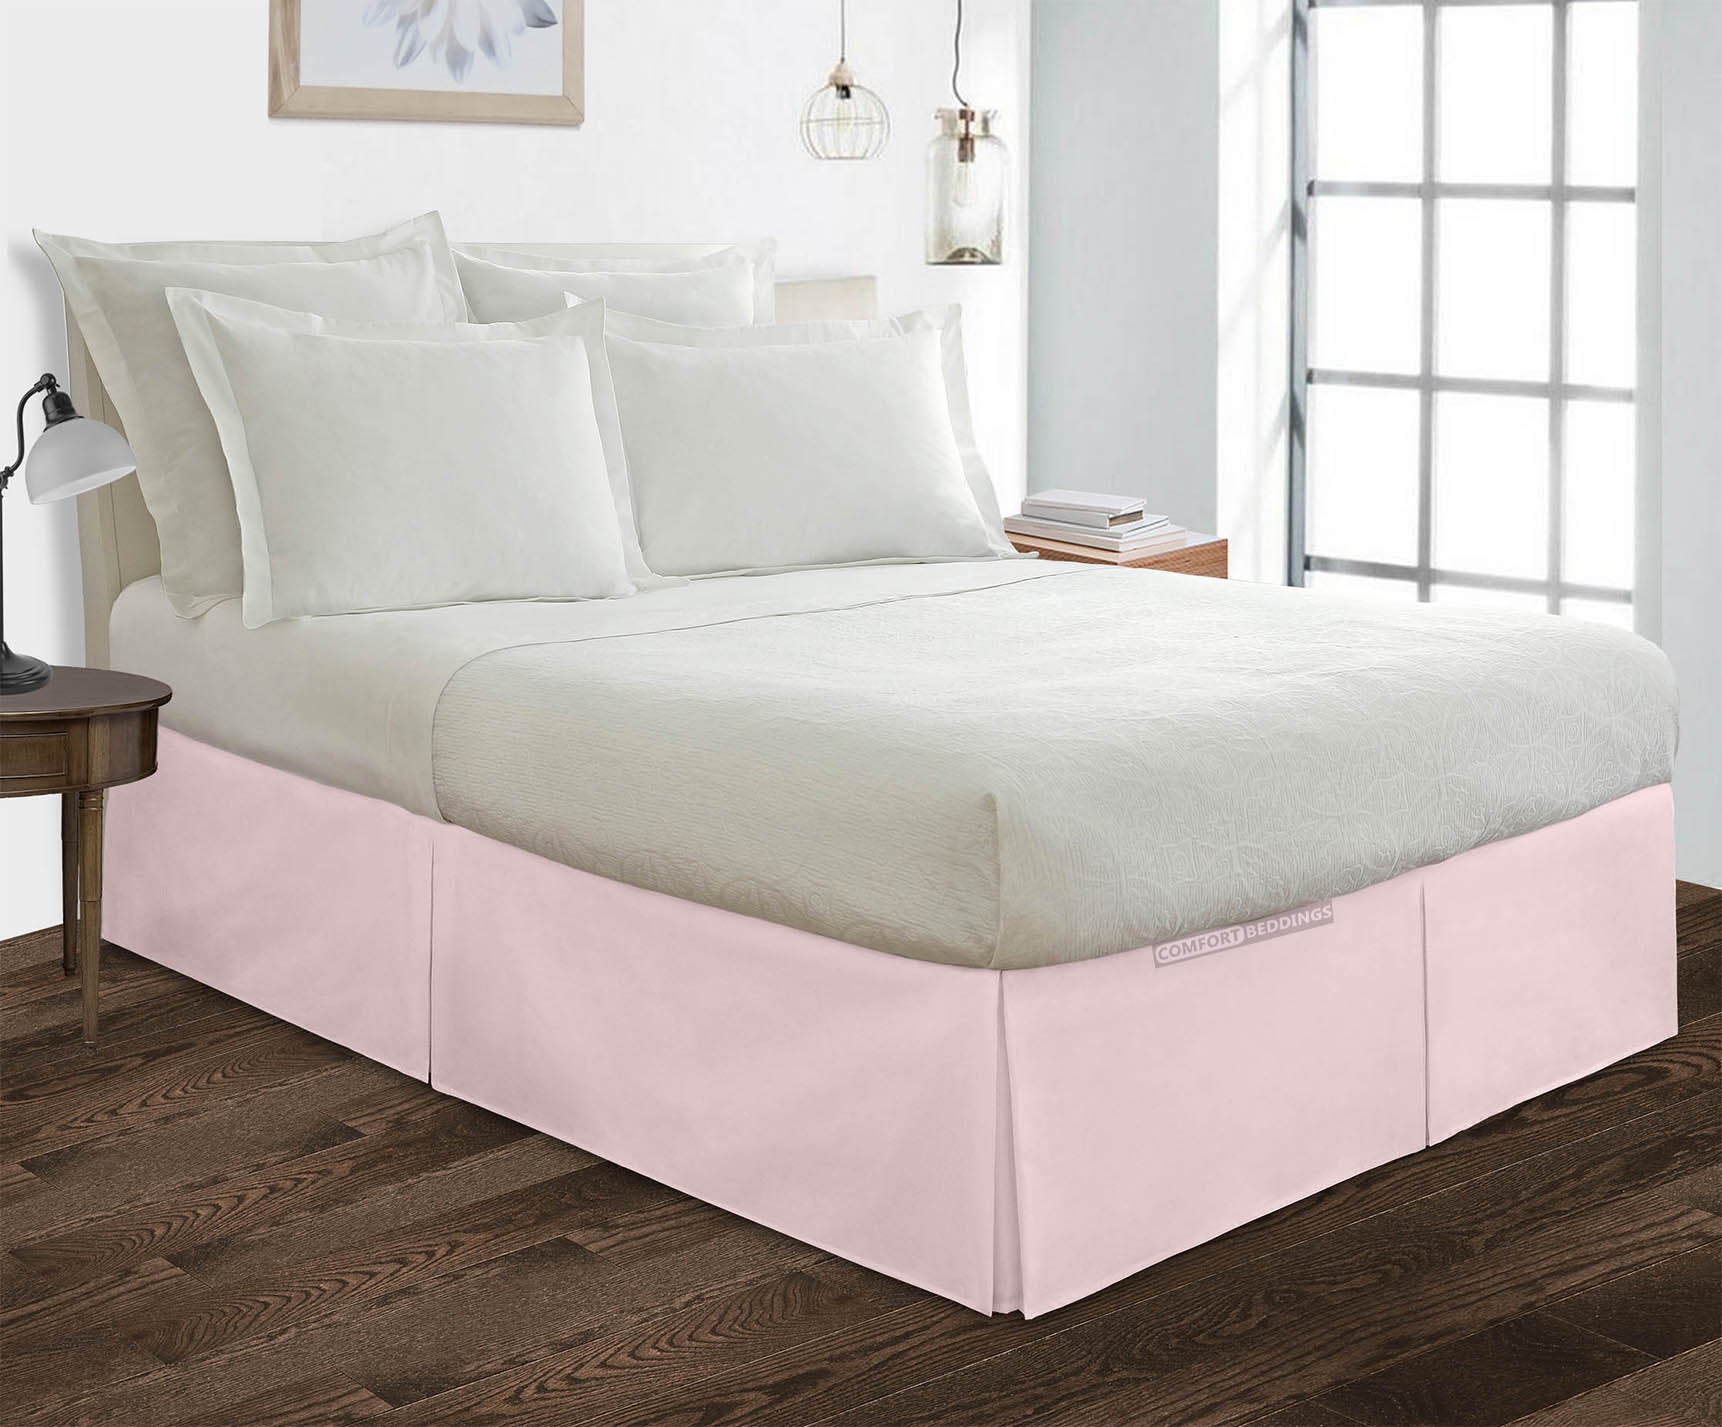 Pink Pleated Bed Skirt